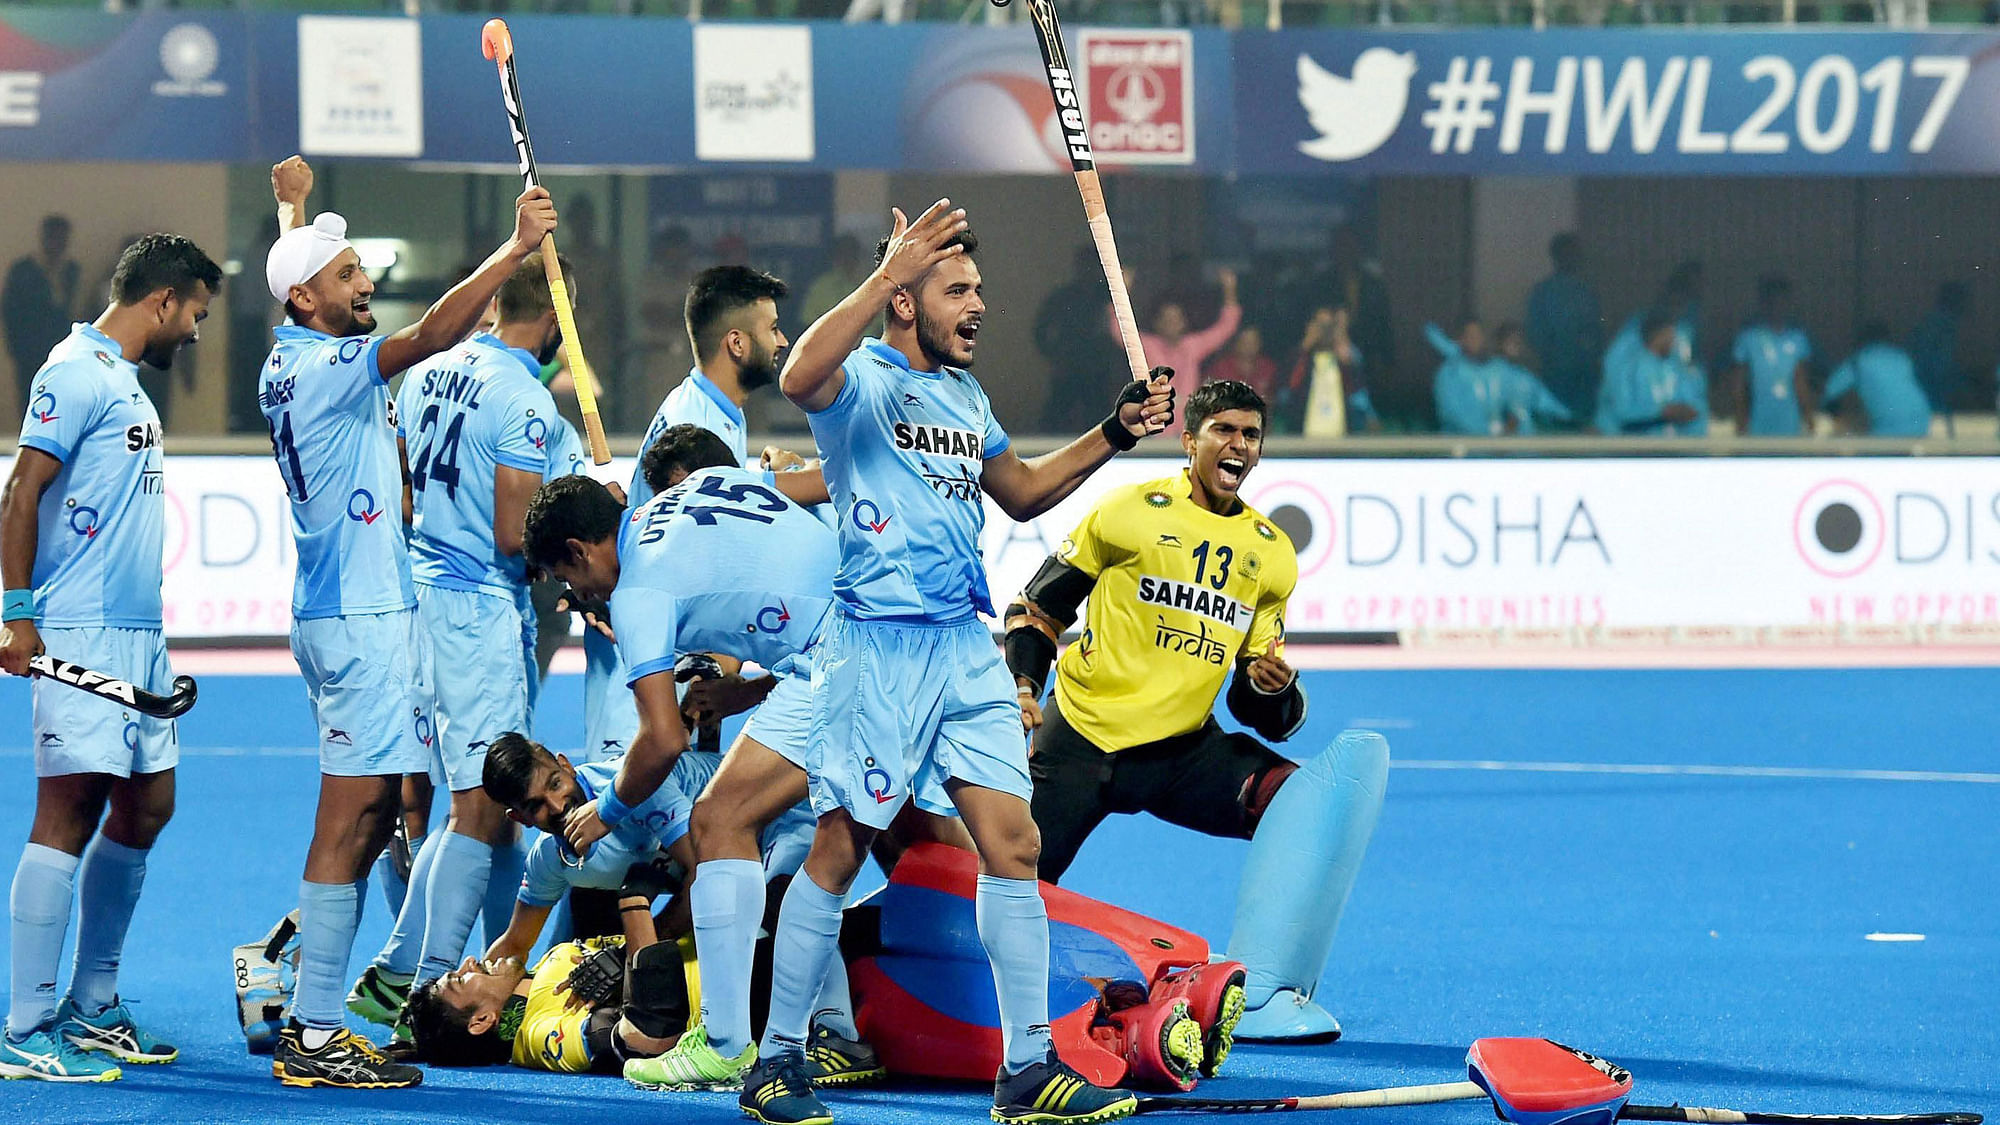 India defeated Belgium 3-2 in the quarter-finals of the Hockey World League Final.